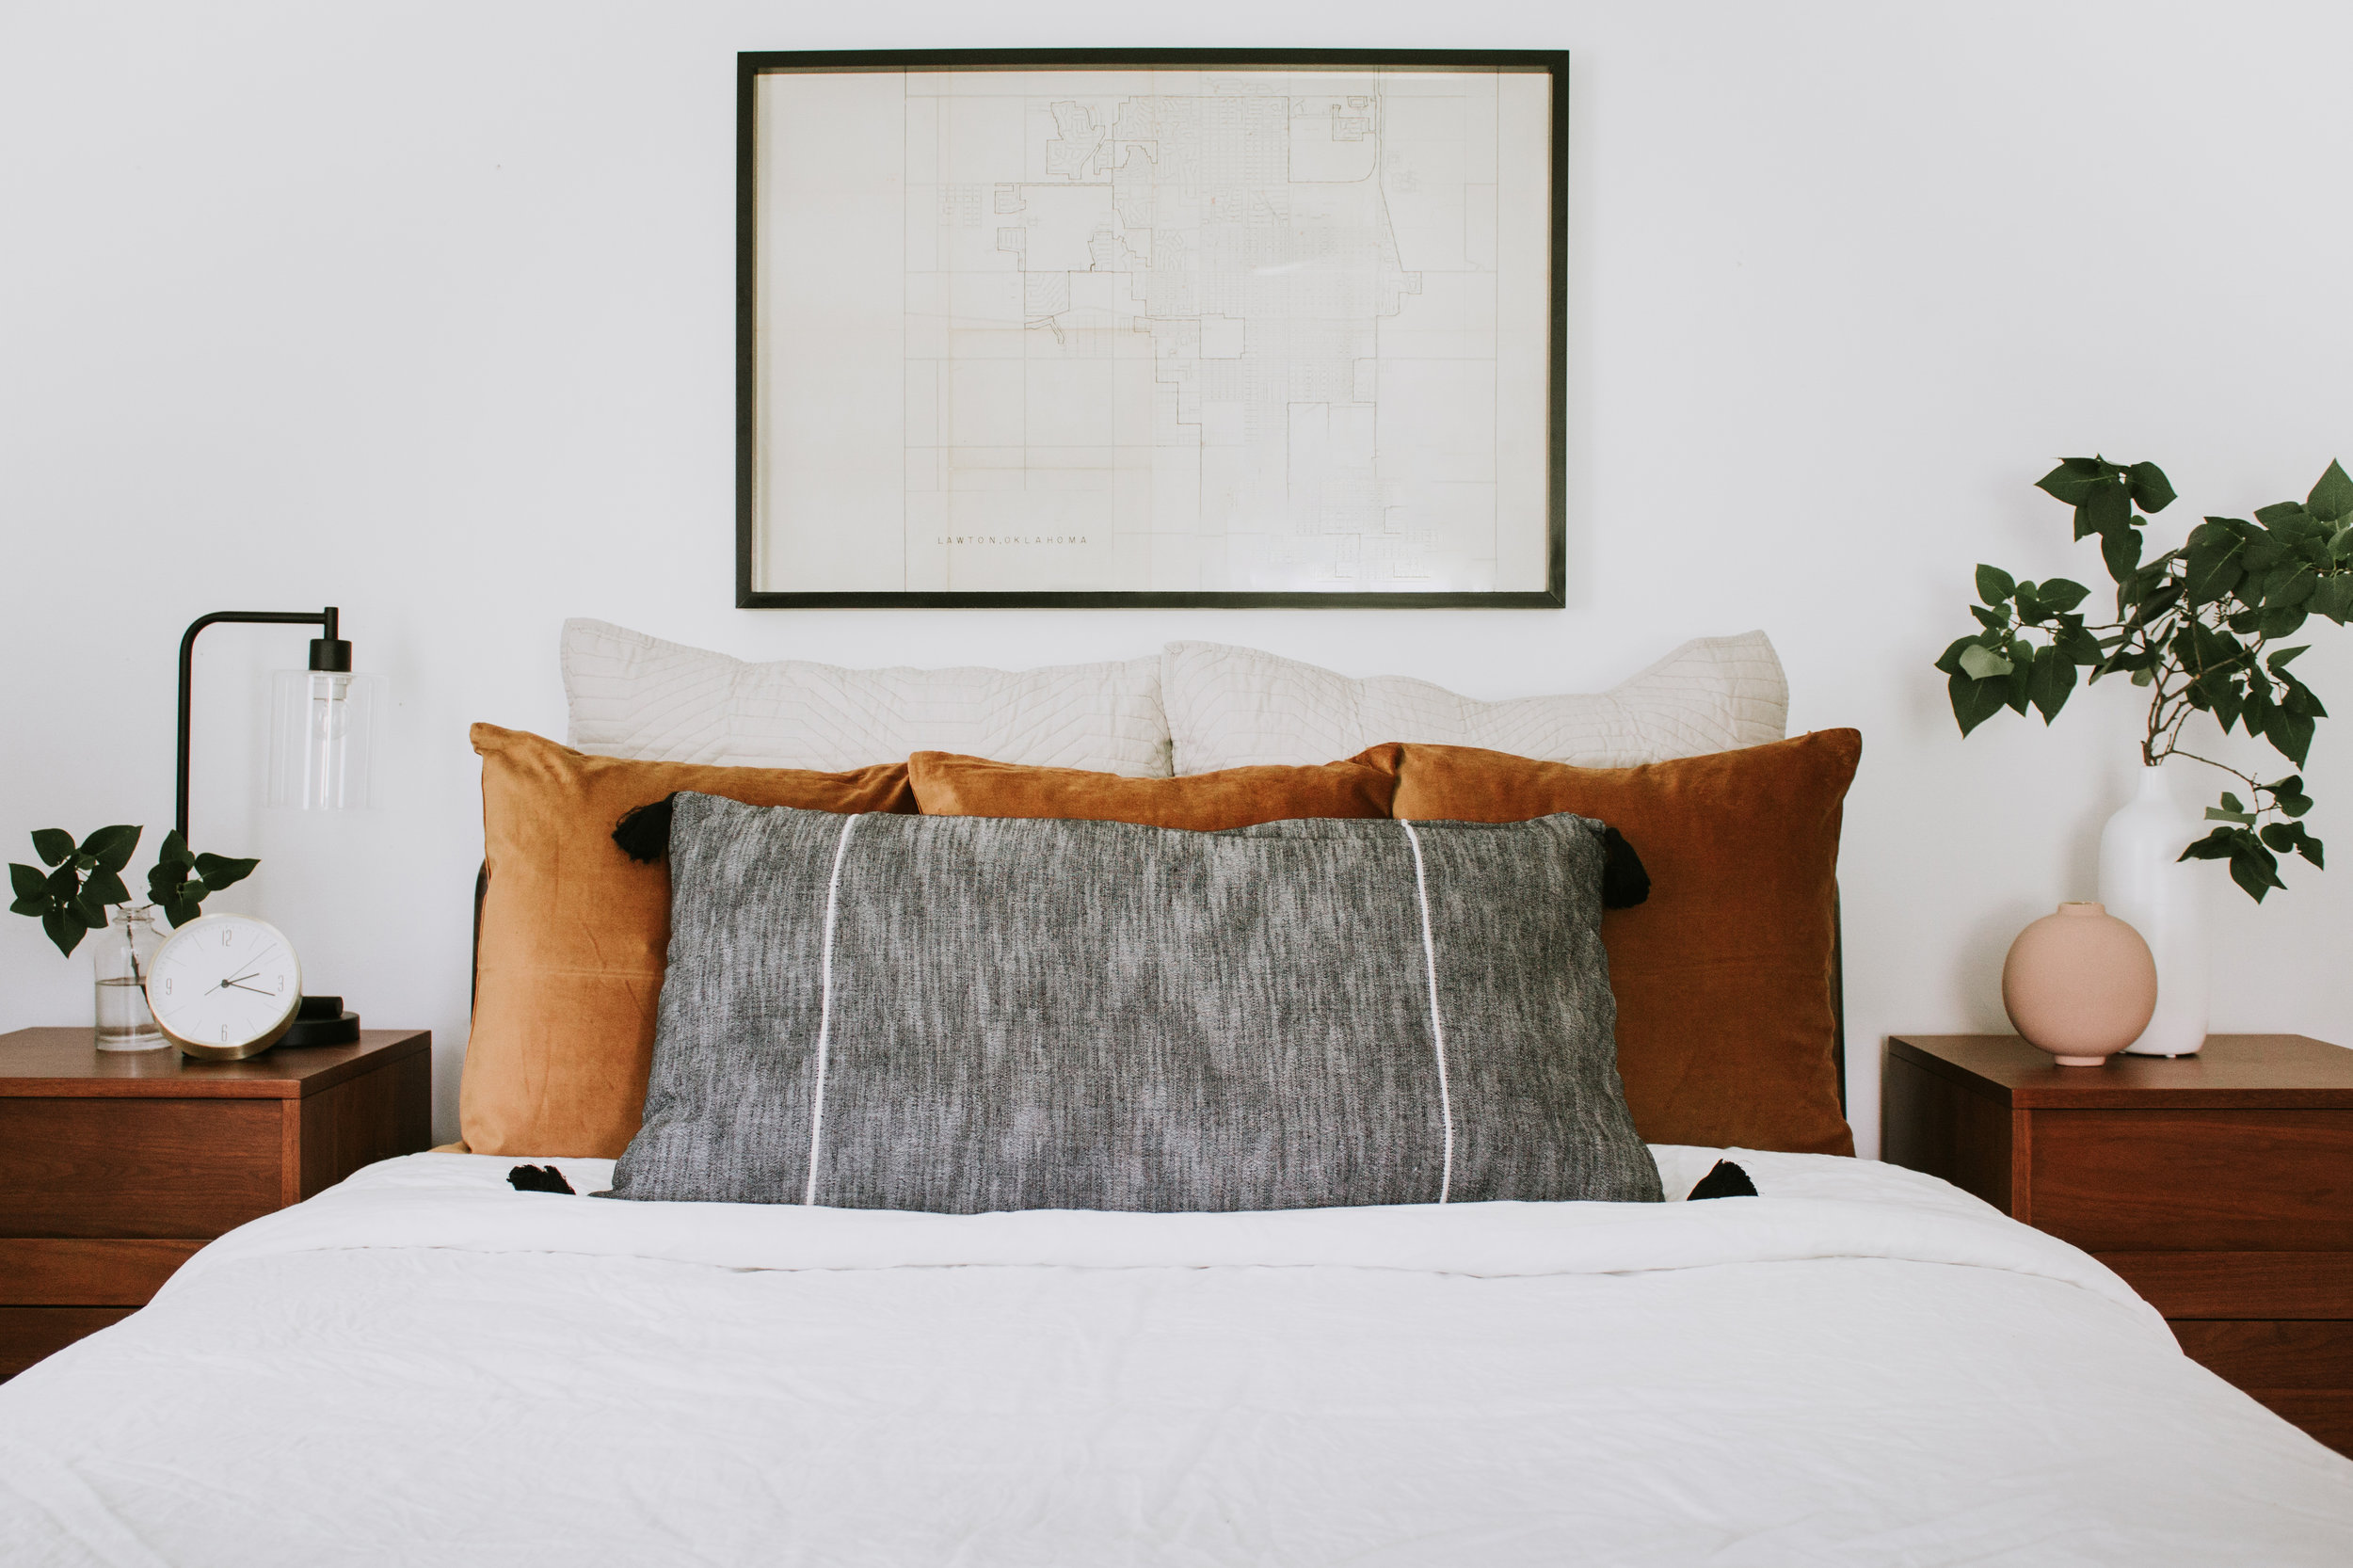 4 different ways to style bed pillows - How to make your bed like an interior designer. 4 pillow layouts and styles by Nadine Stay.